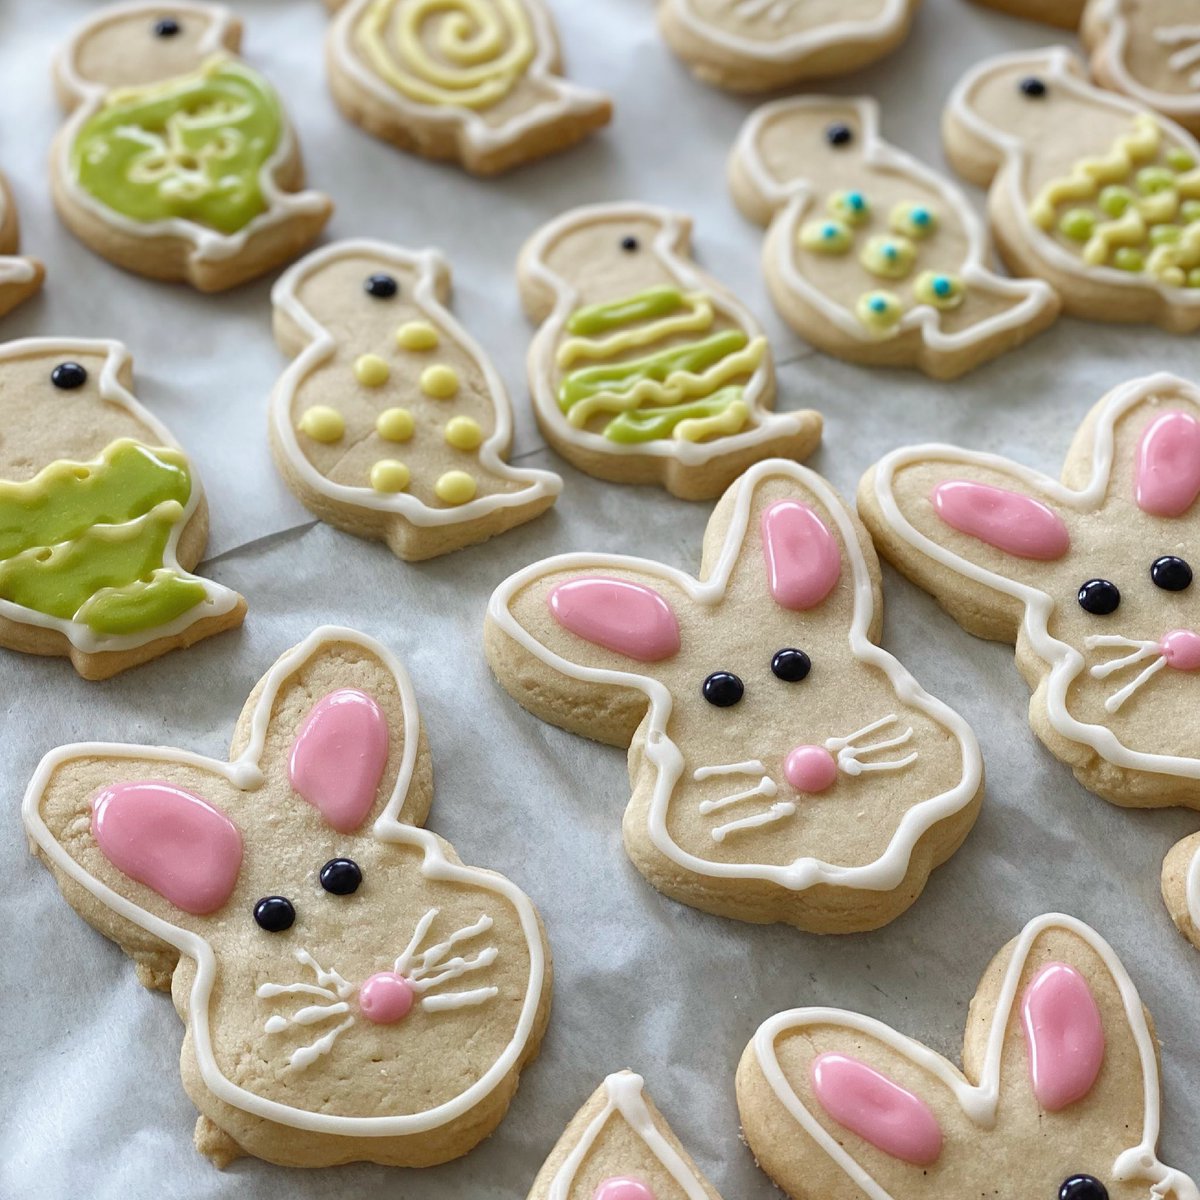 We wish you all a safe and Hoppy Easter! 🐣🐰 #cafelouise #allingoodtaste
.
.
.
#easter #cookies #happyeaster #ctbusiness #cteats #cteatsout #ctfood #eatinct #ctbites #westhartford #westhartfordct #hartfordct #ctfoodie #goodeats #supportlocal #eatlocal #SupportLocalBusinesses